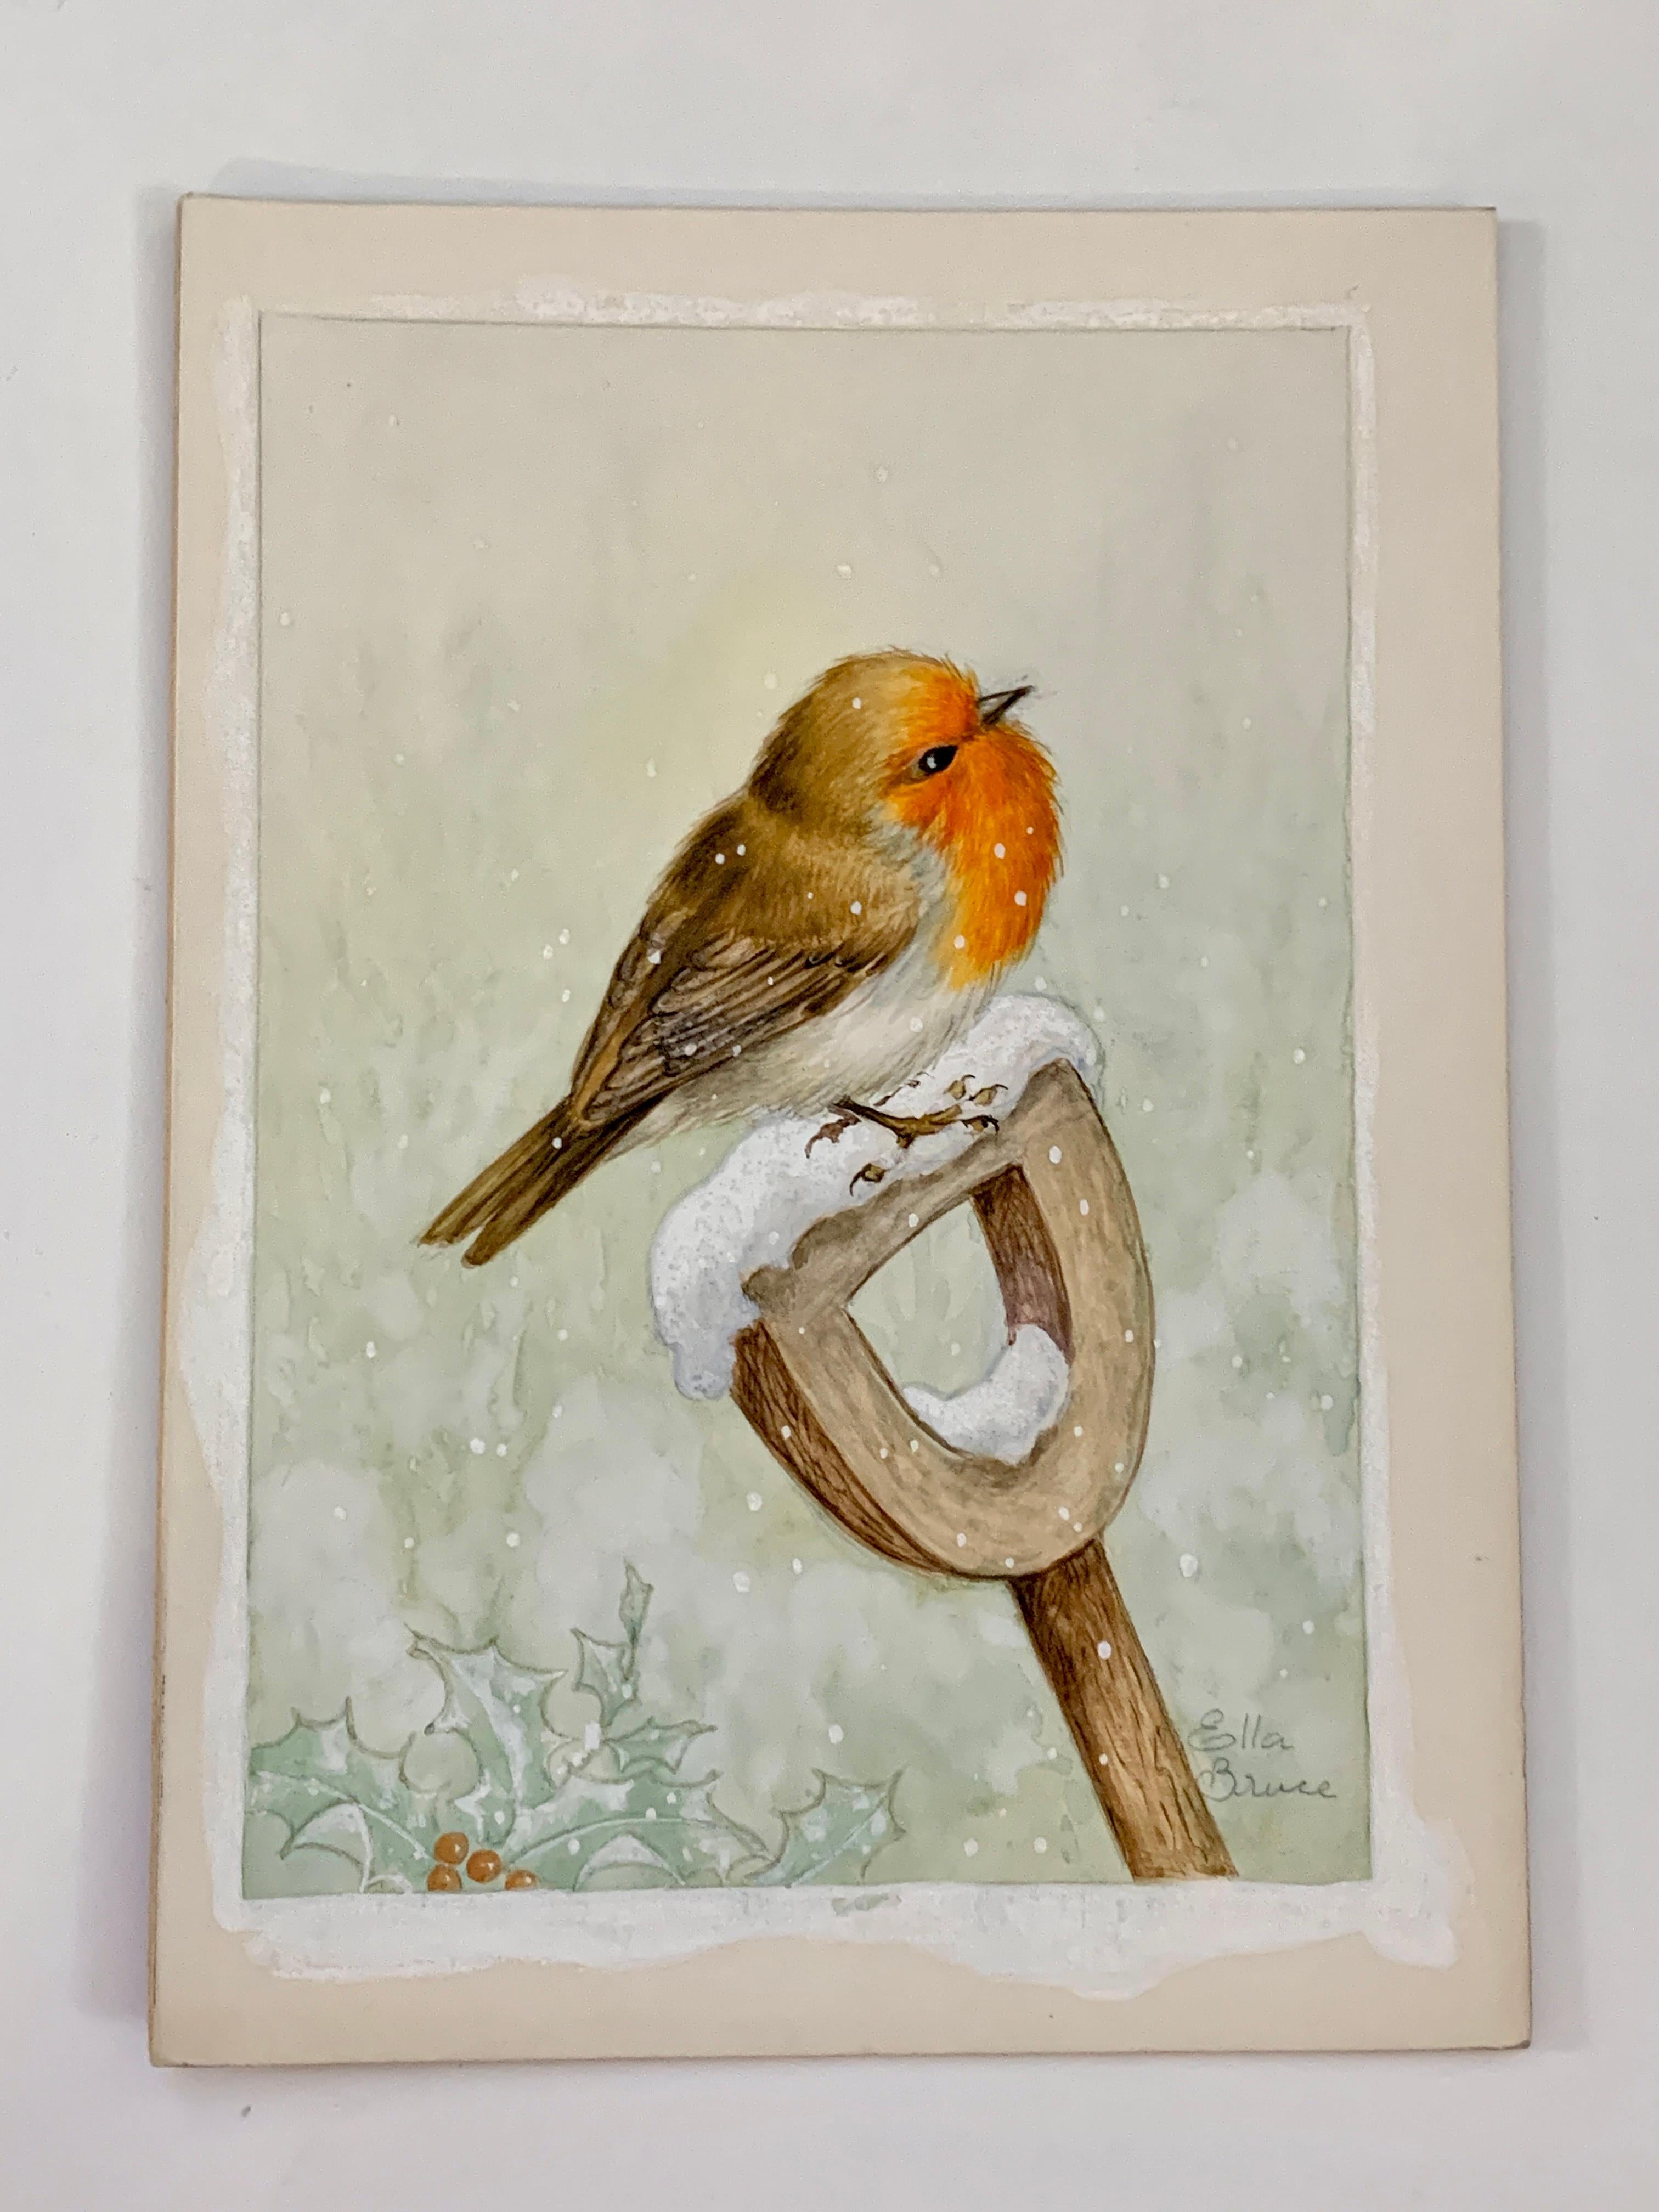 Christmas Winter English watercolor of a Robin standing on a garden fork handle